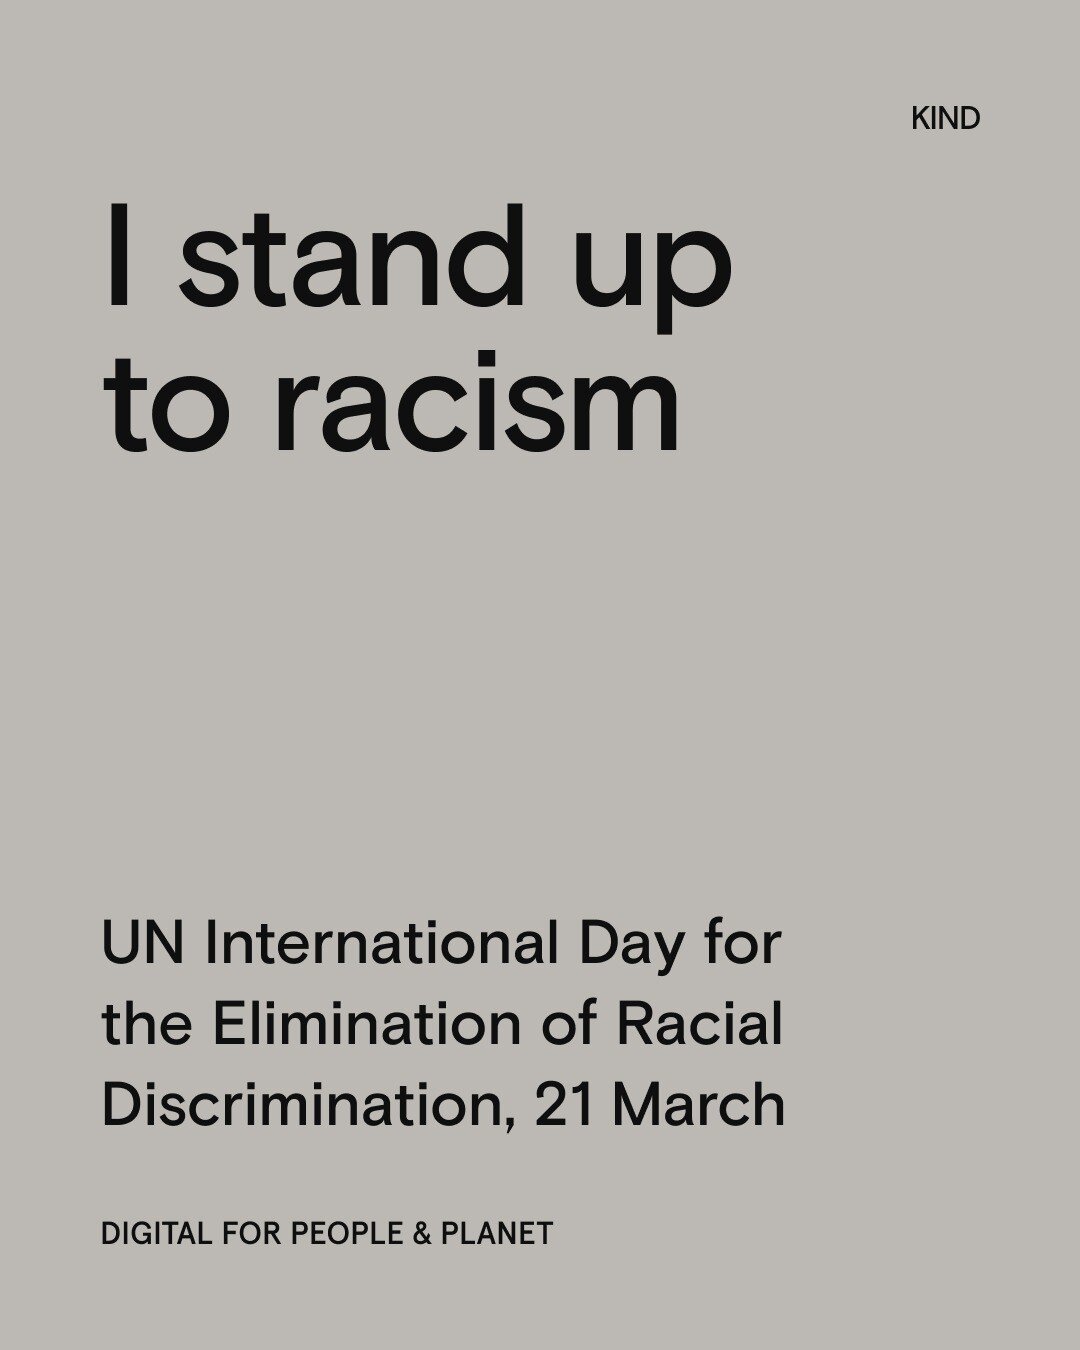 Today, on UN International Day for the Elimination of Racial Discrimination, I'm sharing my support for #FightRacism and #StandUp4HumanRights 

ID
I stand up to racism. UN International Day for the Elimination of Racial Discrimination. Dark grey text